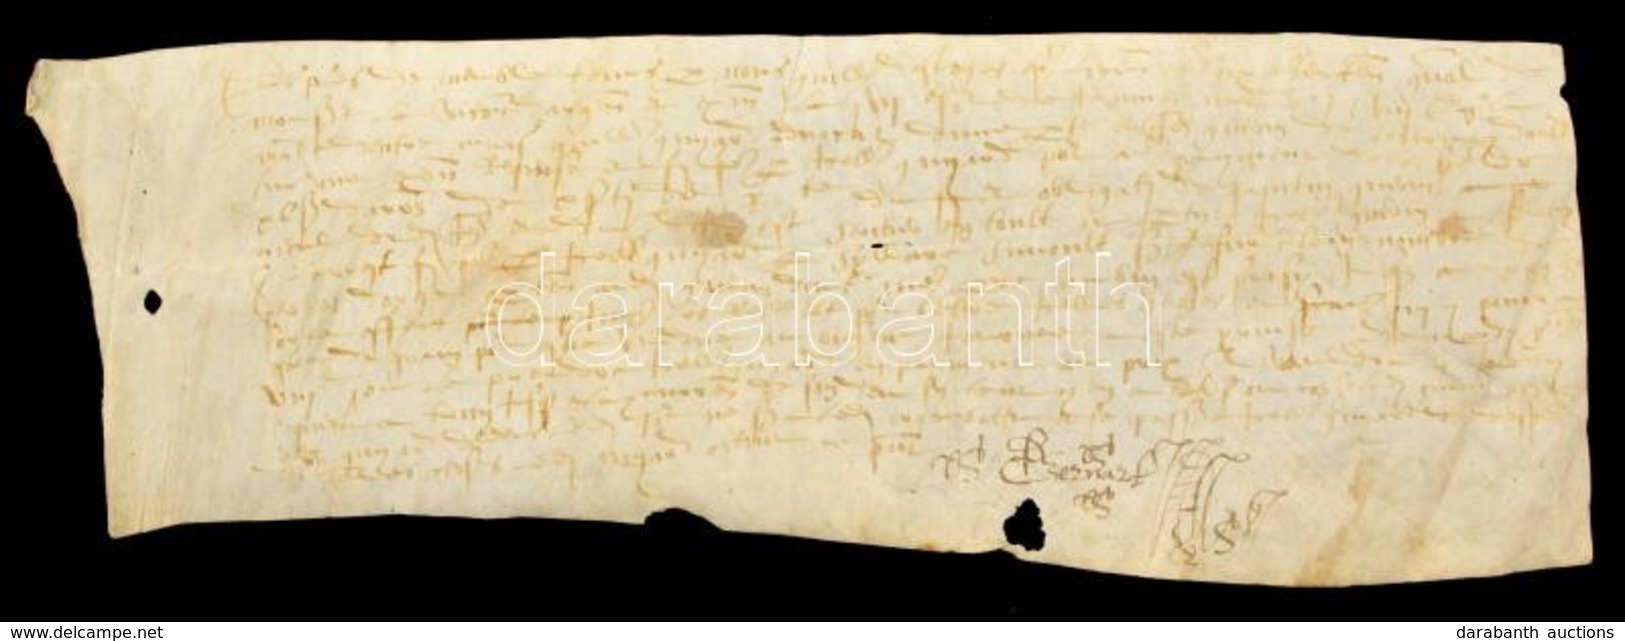 Cca 1600-1800 Francia Nyelvű Irat, Pergamen, Kissé Foltos /
Cca 1600-1800 Document Written In French, On Parchment, With - Unclassified